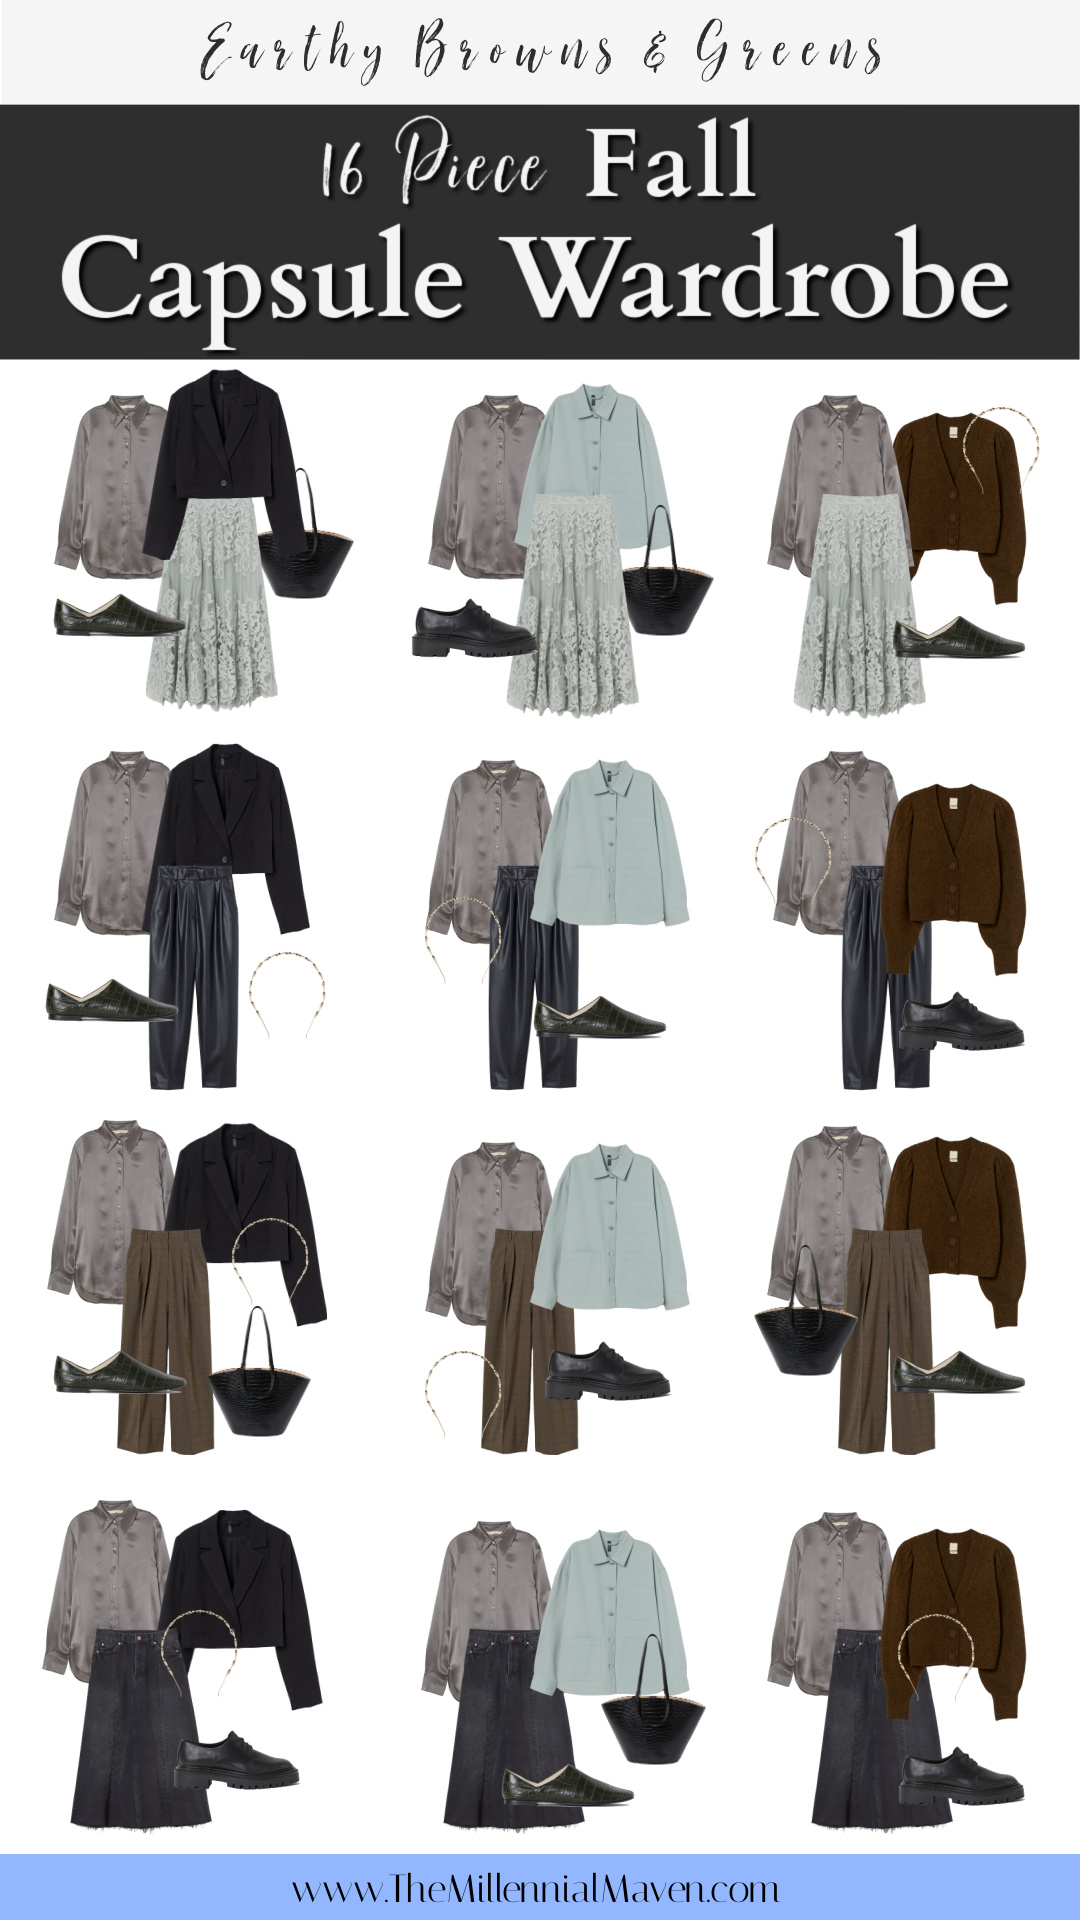 Fall Capsule Wardrobe 2020 4 Outfit Combinations